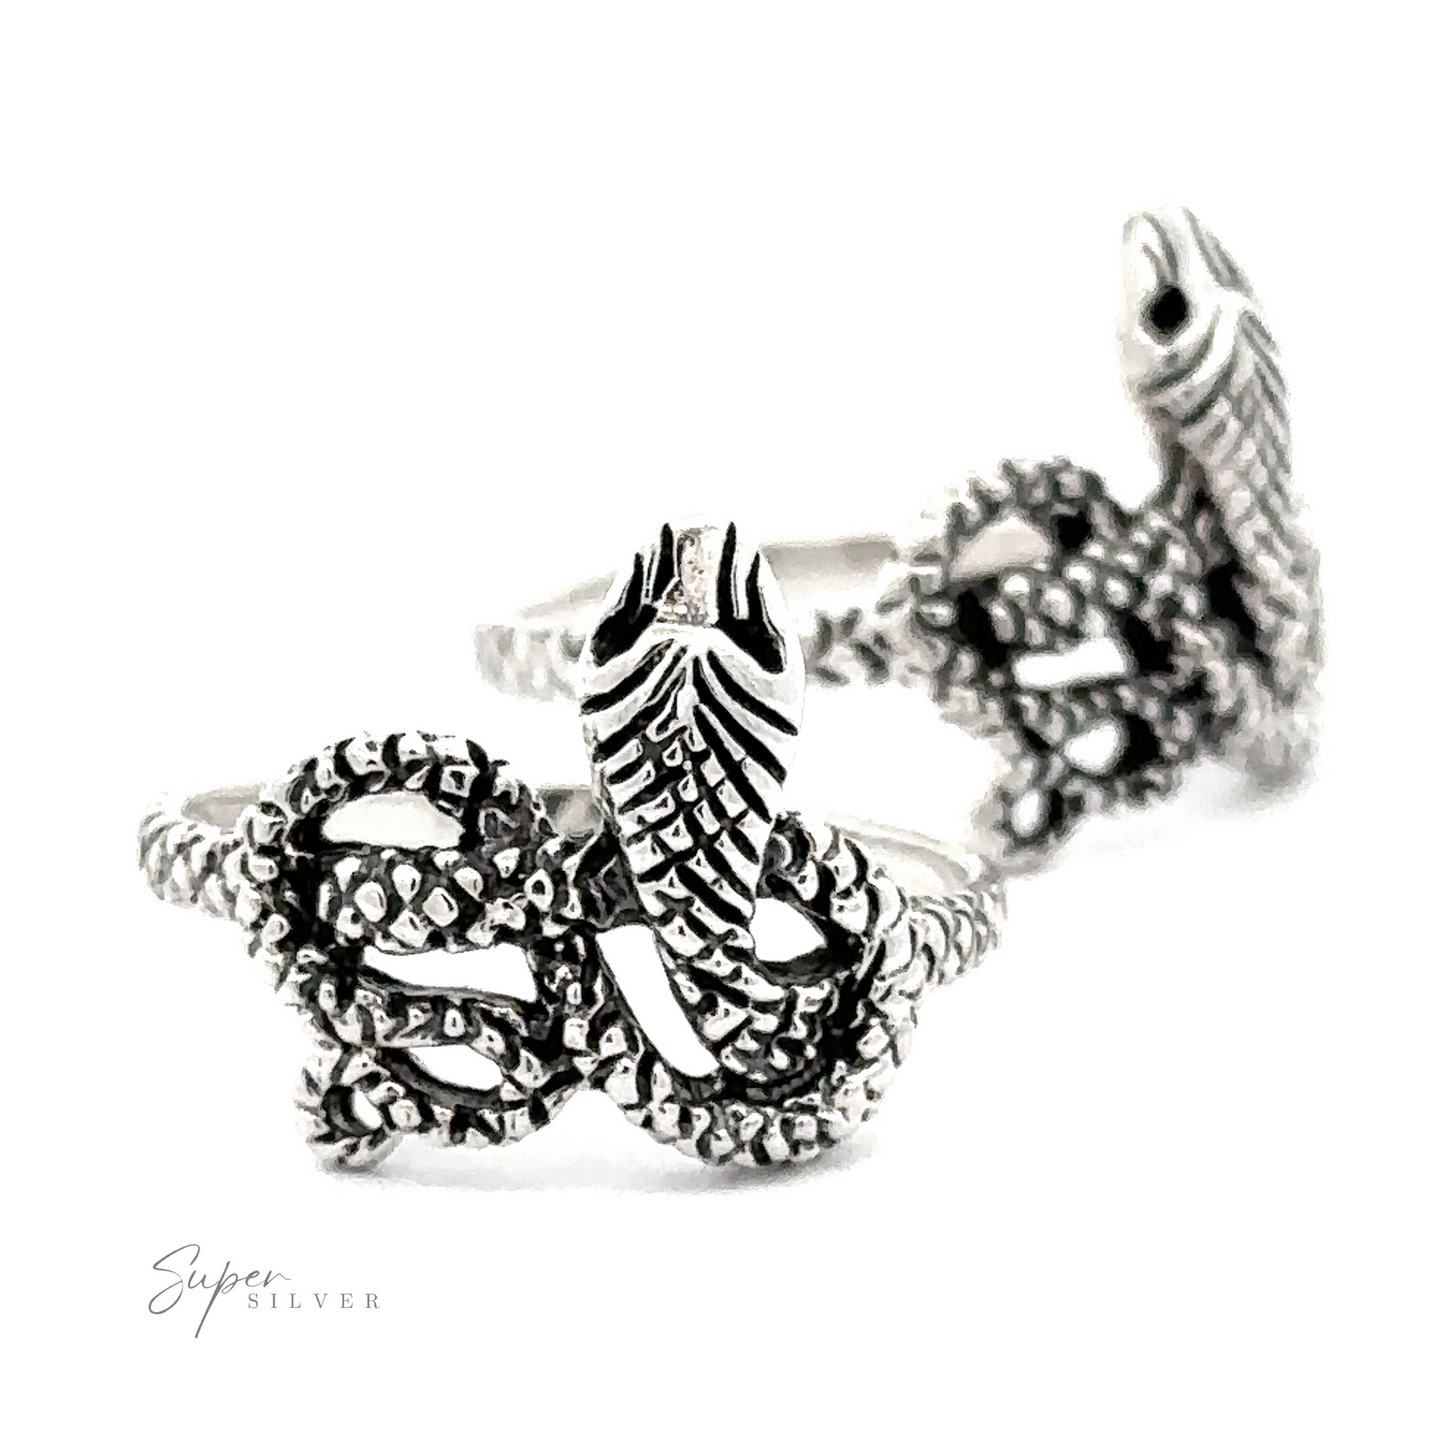 Twisted Snake Ring with intricate scale and wing details, adorned with small gemstones on tail and spine, photographed on a white background.